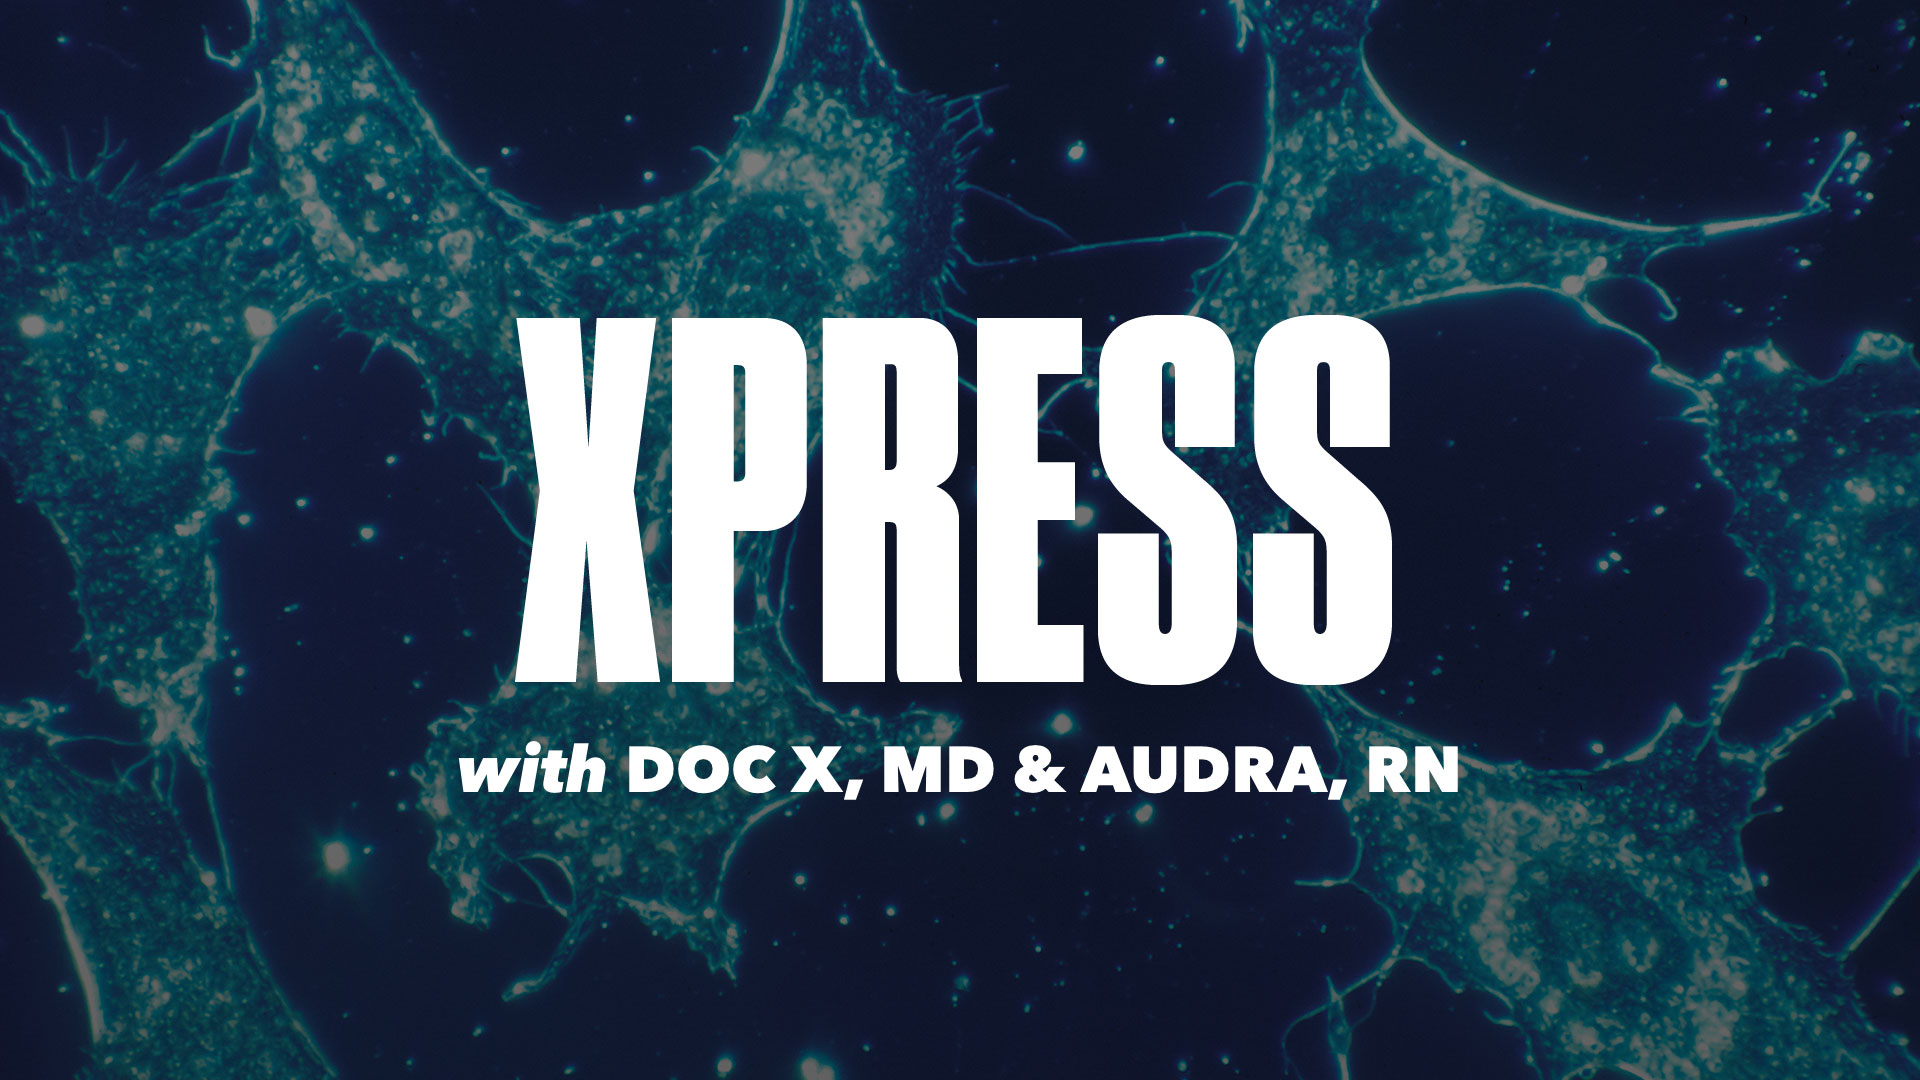 XPress with Dr. X, MD and Audra Smith, RN